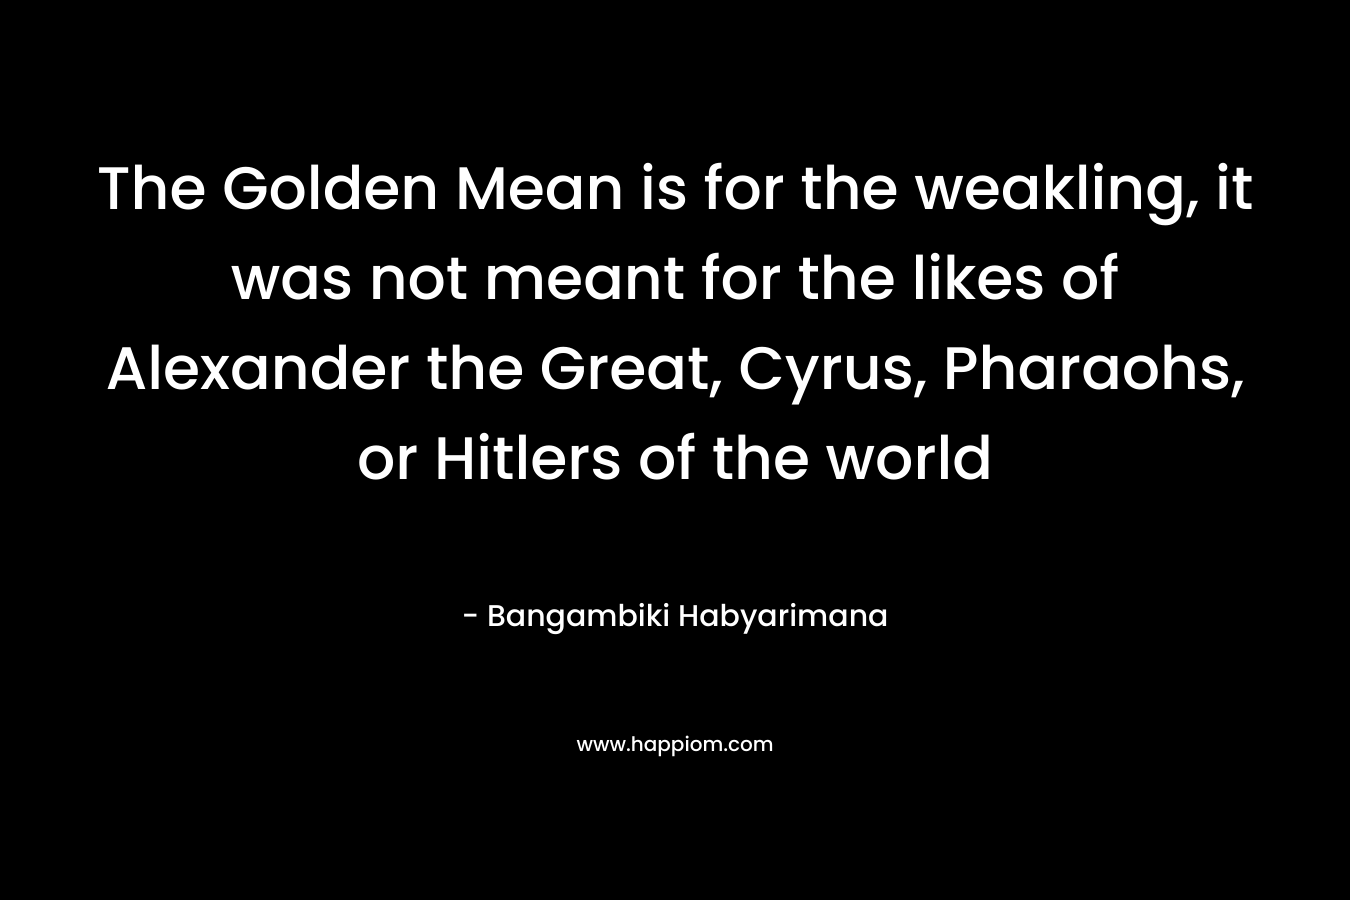 The Golden Mean is for the weakling, it was not meant for the likes of Alexander the Great, Cyrus, Pharaohs, or Hitlers of the world – Bangambiki Habyarimana